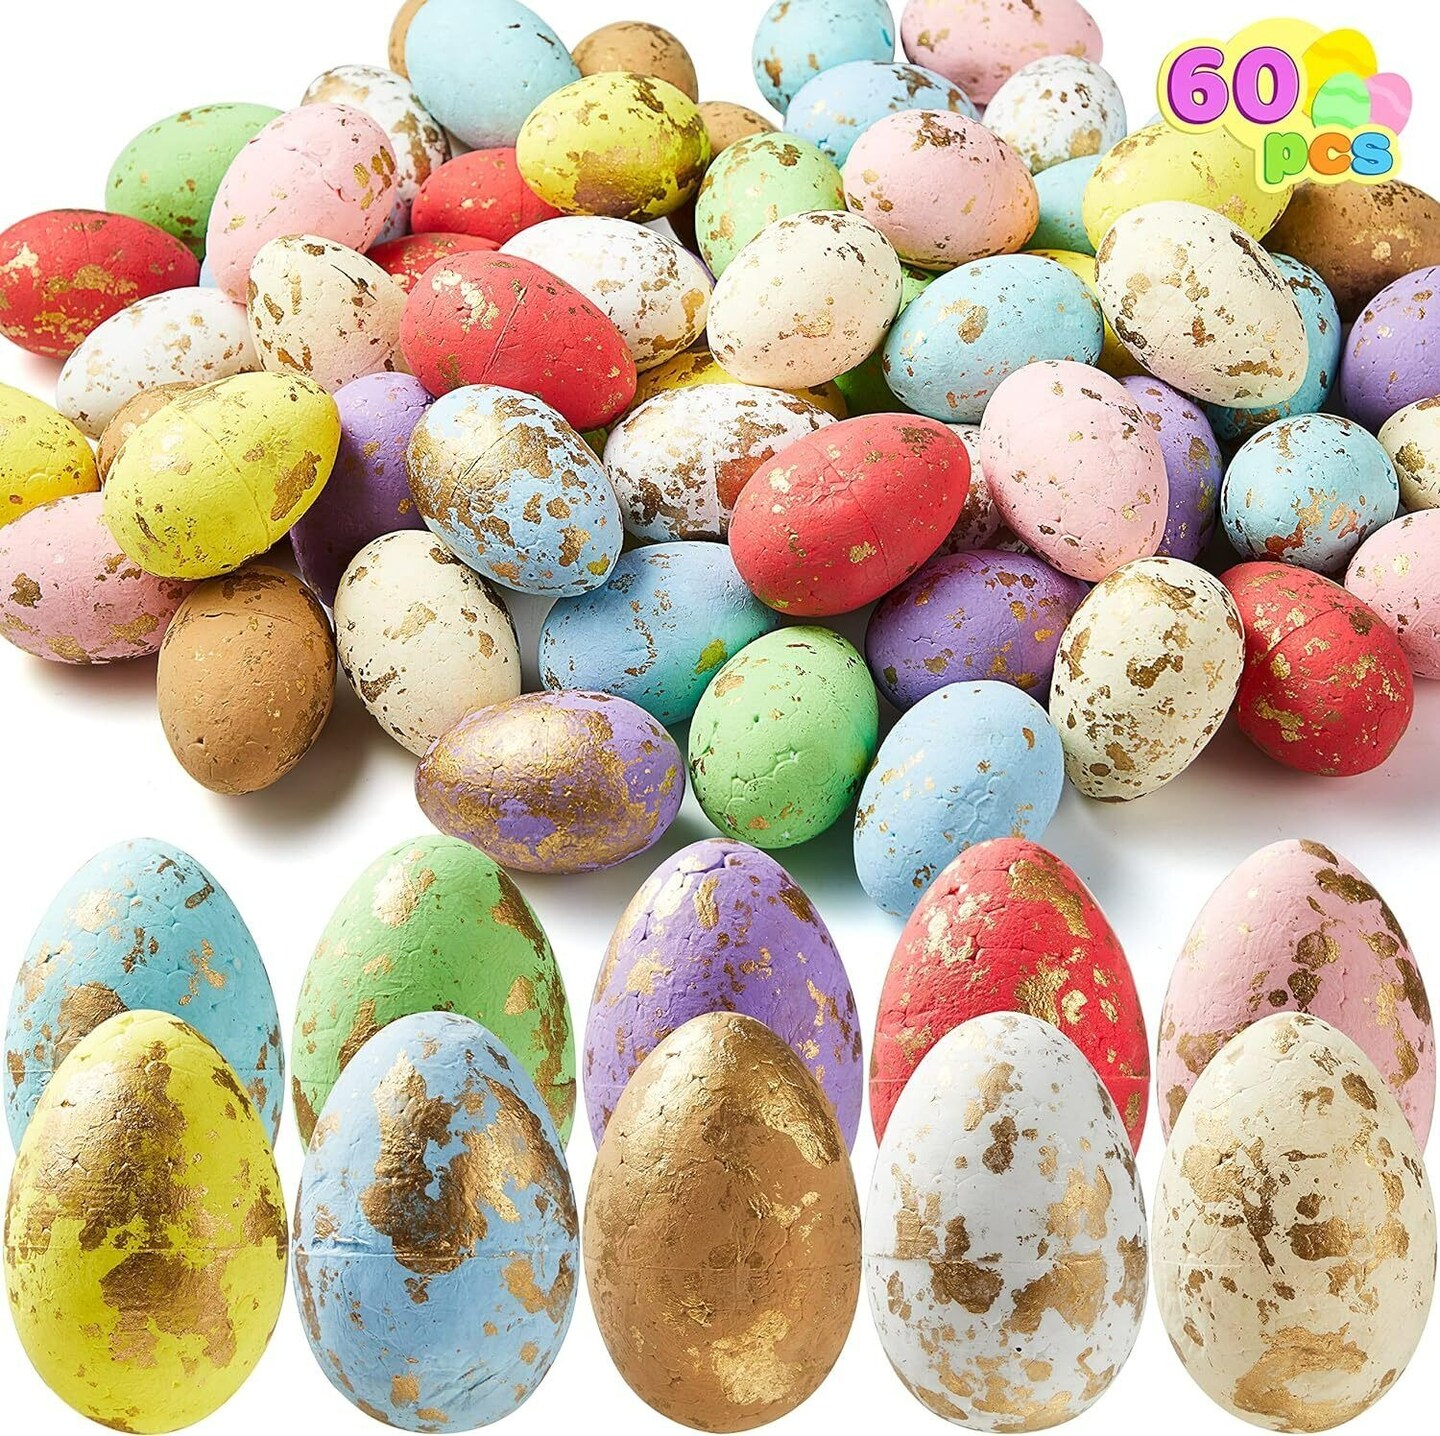 60 Pcs Foam Easter Eggs for Crafts and Easter Party Decorations Home Decor